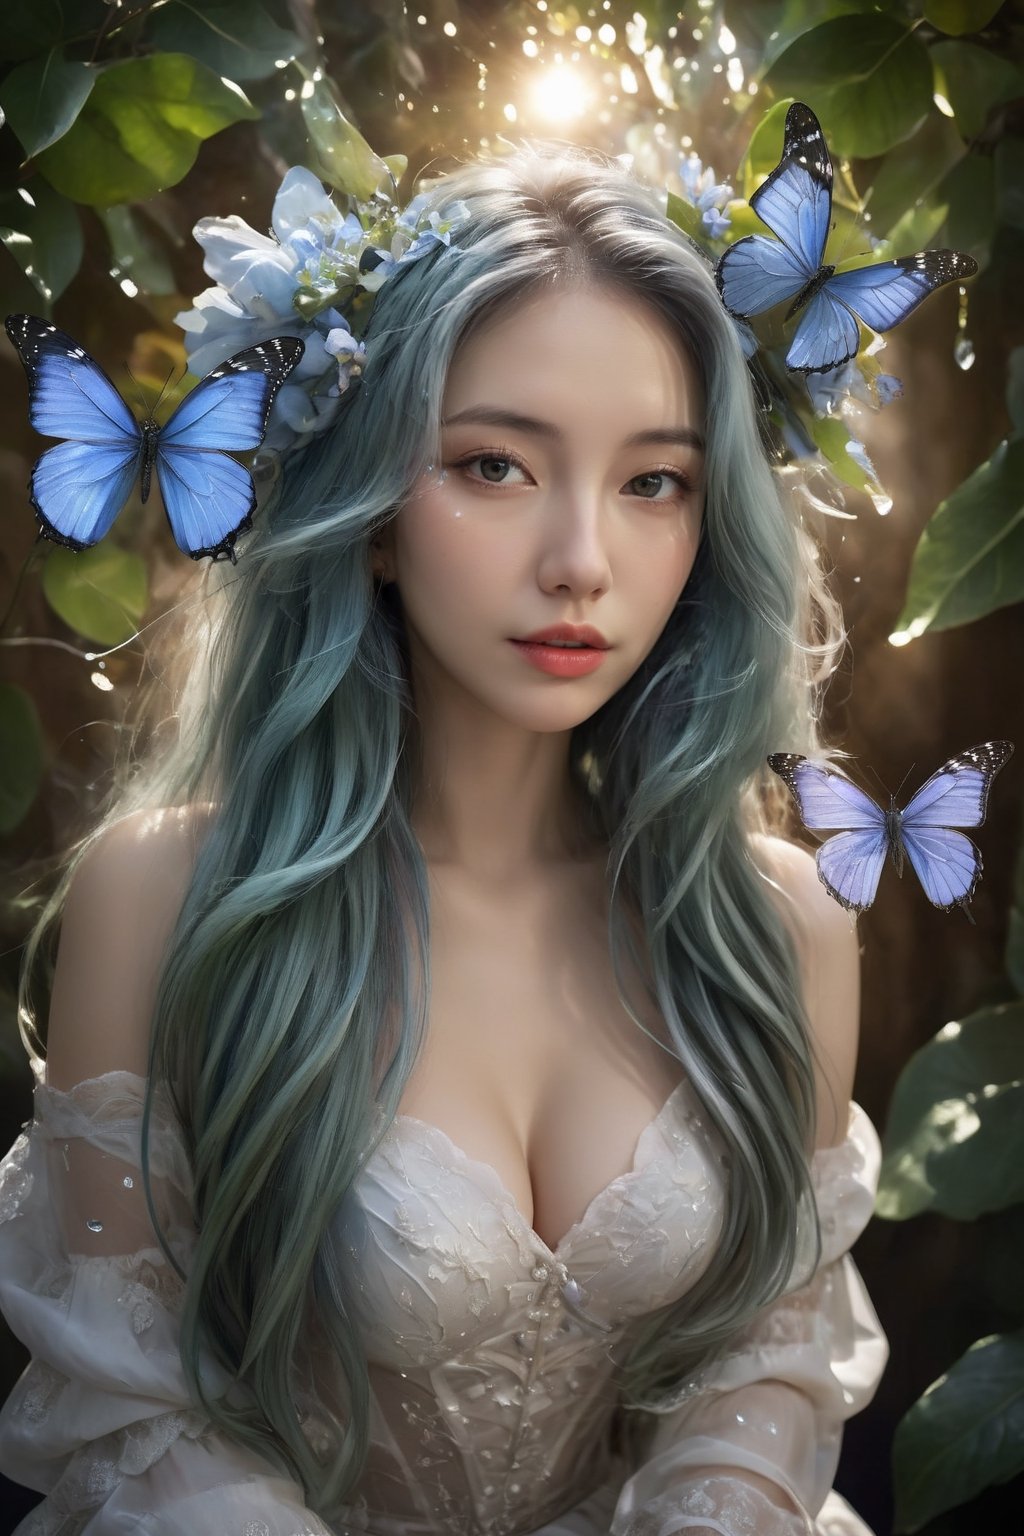 (ultra realistic,best quality),photorealistic,Extremely Realistic, in depth, cinematic light,hubggirl,
porcelain skin, baroque, long swirling green hair, lavish green leaves, falling blue flowers, celestial lighting, butterflies, tree branches, sky, golden glowing, water drops,

perfect lighting, vibrant colors, intricate details,
high detailed skin, pale skin,
intricate background, realism,realistic,raw,analog,portrait,photorealistic,
taken by Canon EOS,SIGMA Art Lens 35mm F1.4,ISO 200 Shutter Speed 2000,Vivid picture